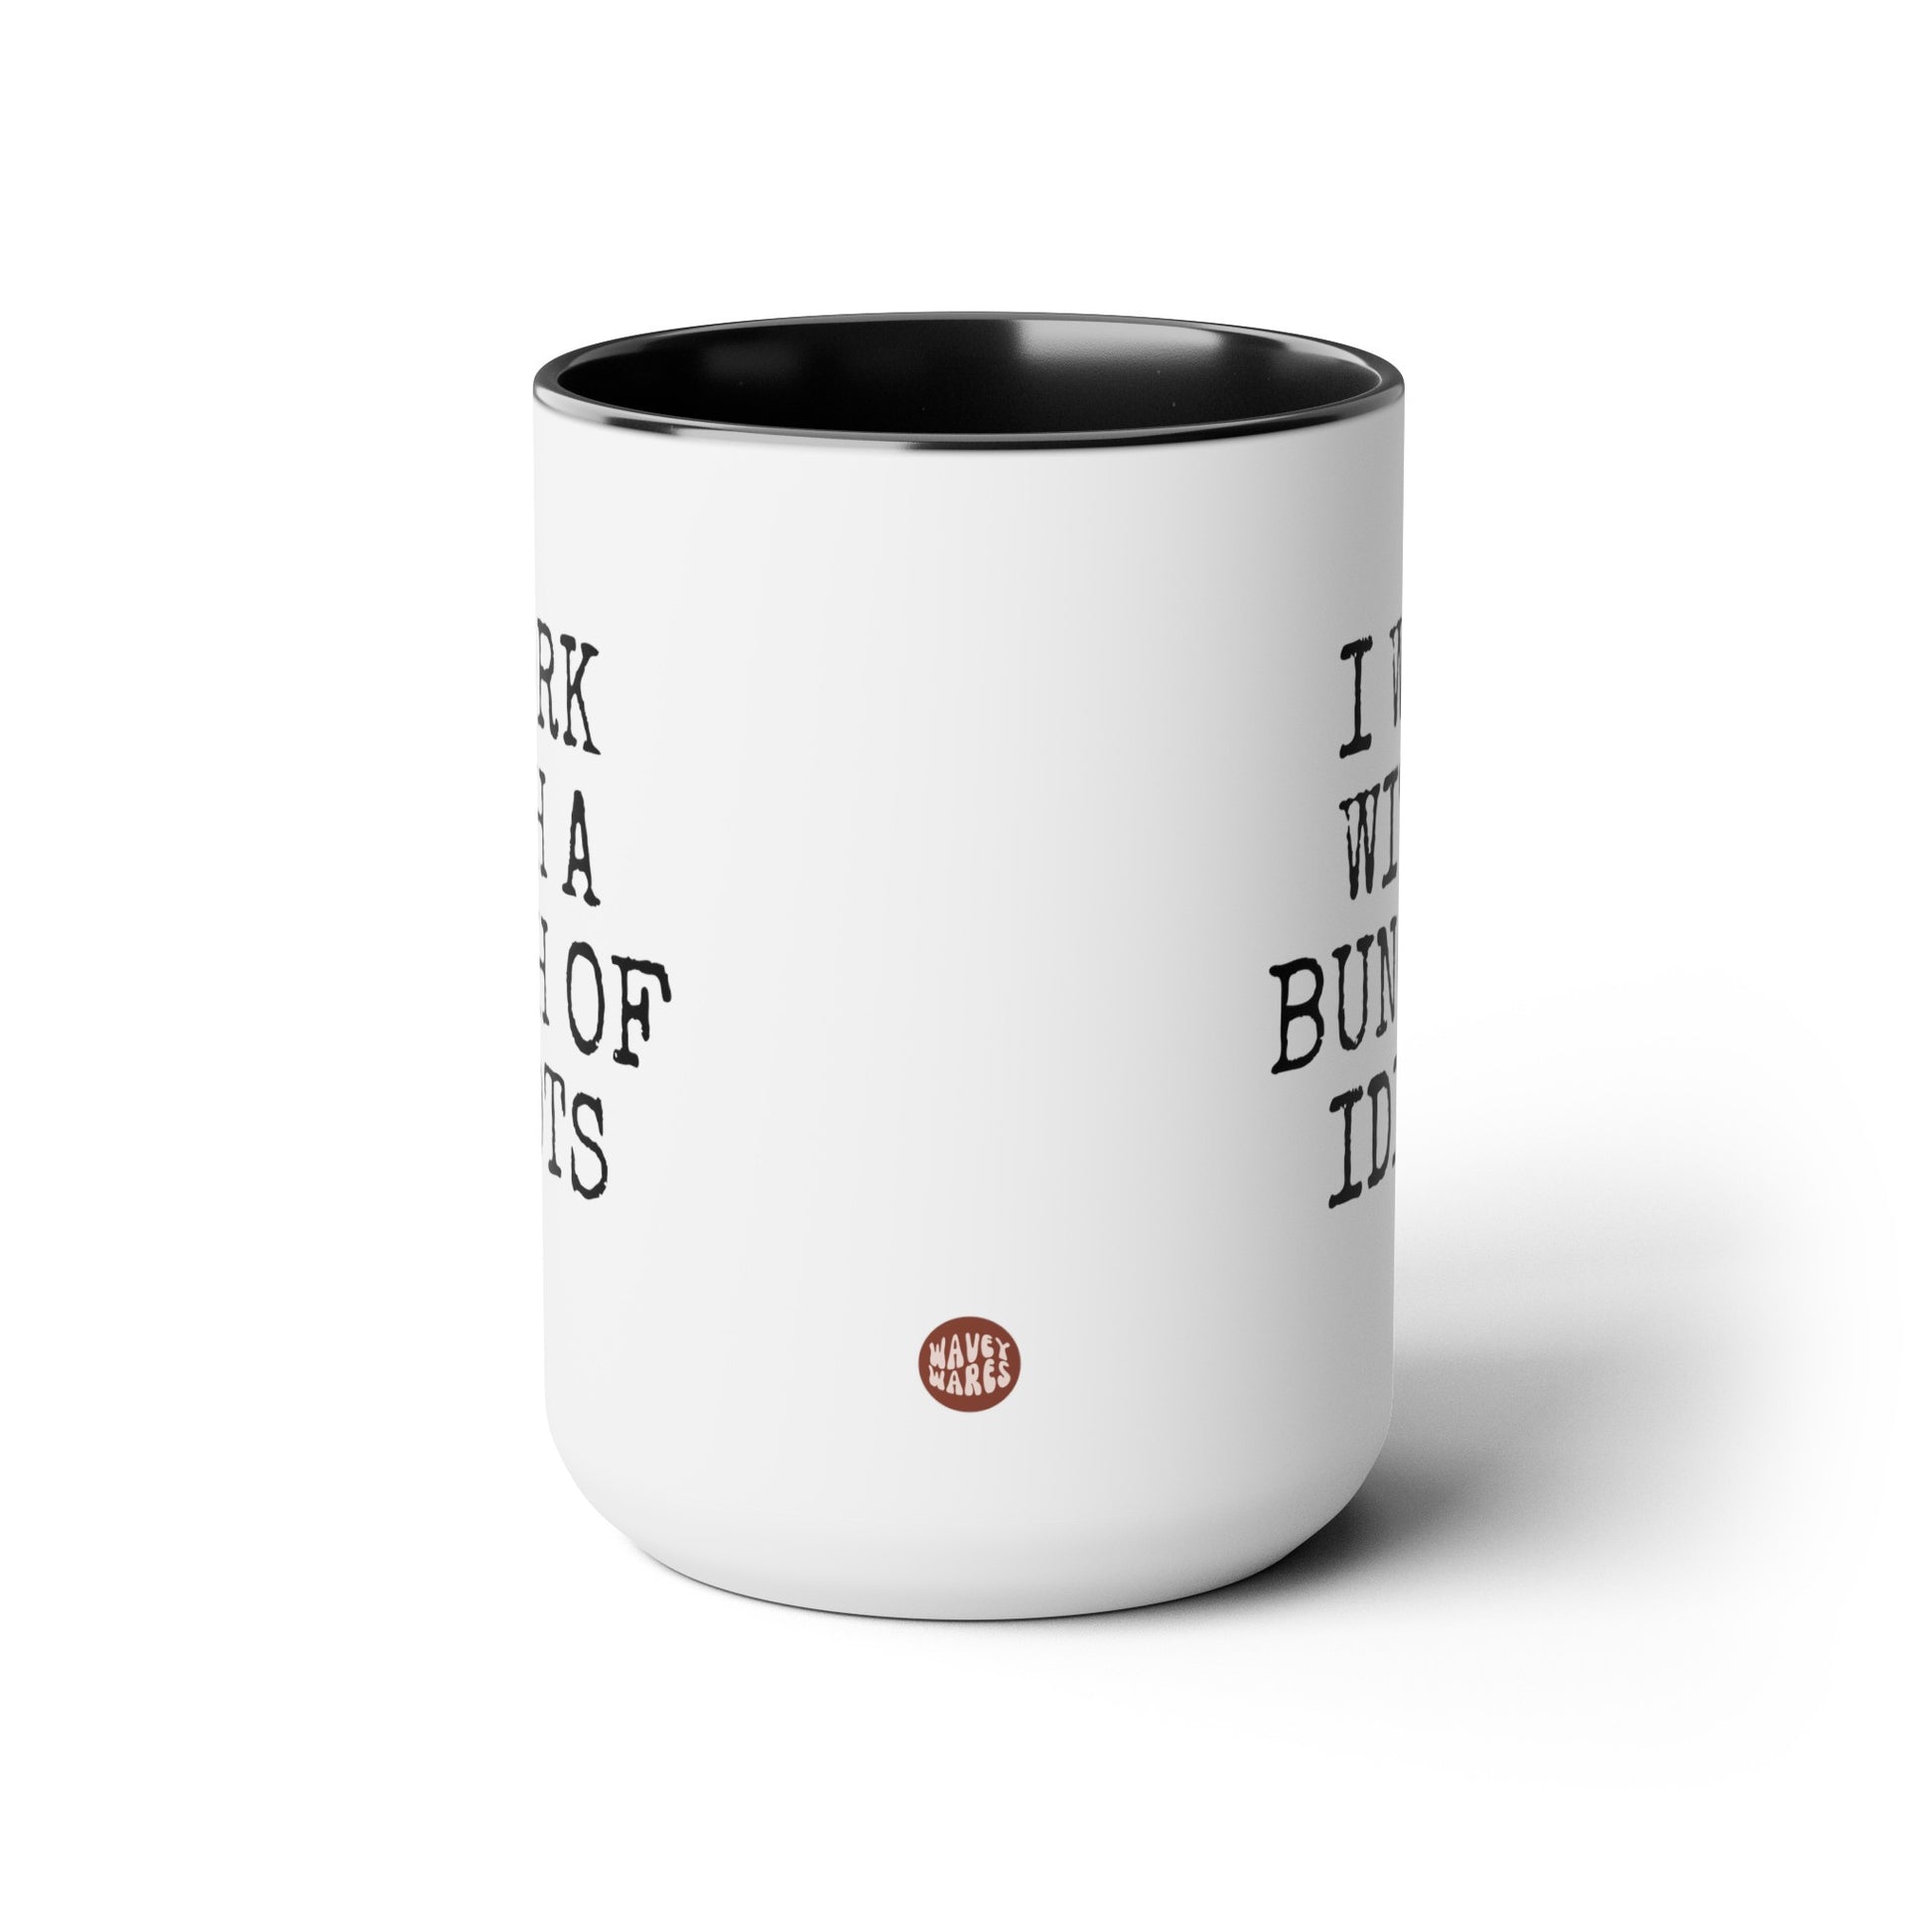 I Work With A Bunch Of Idiots 15oz white with black accent funny large coffee mug gift for coworker office humor novelty work joke christmas secret santa present waveywares wavey wares wavywares wavy wares side